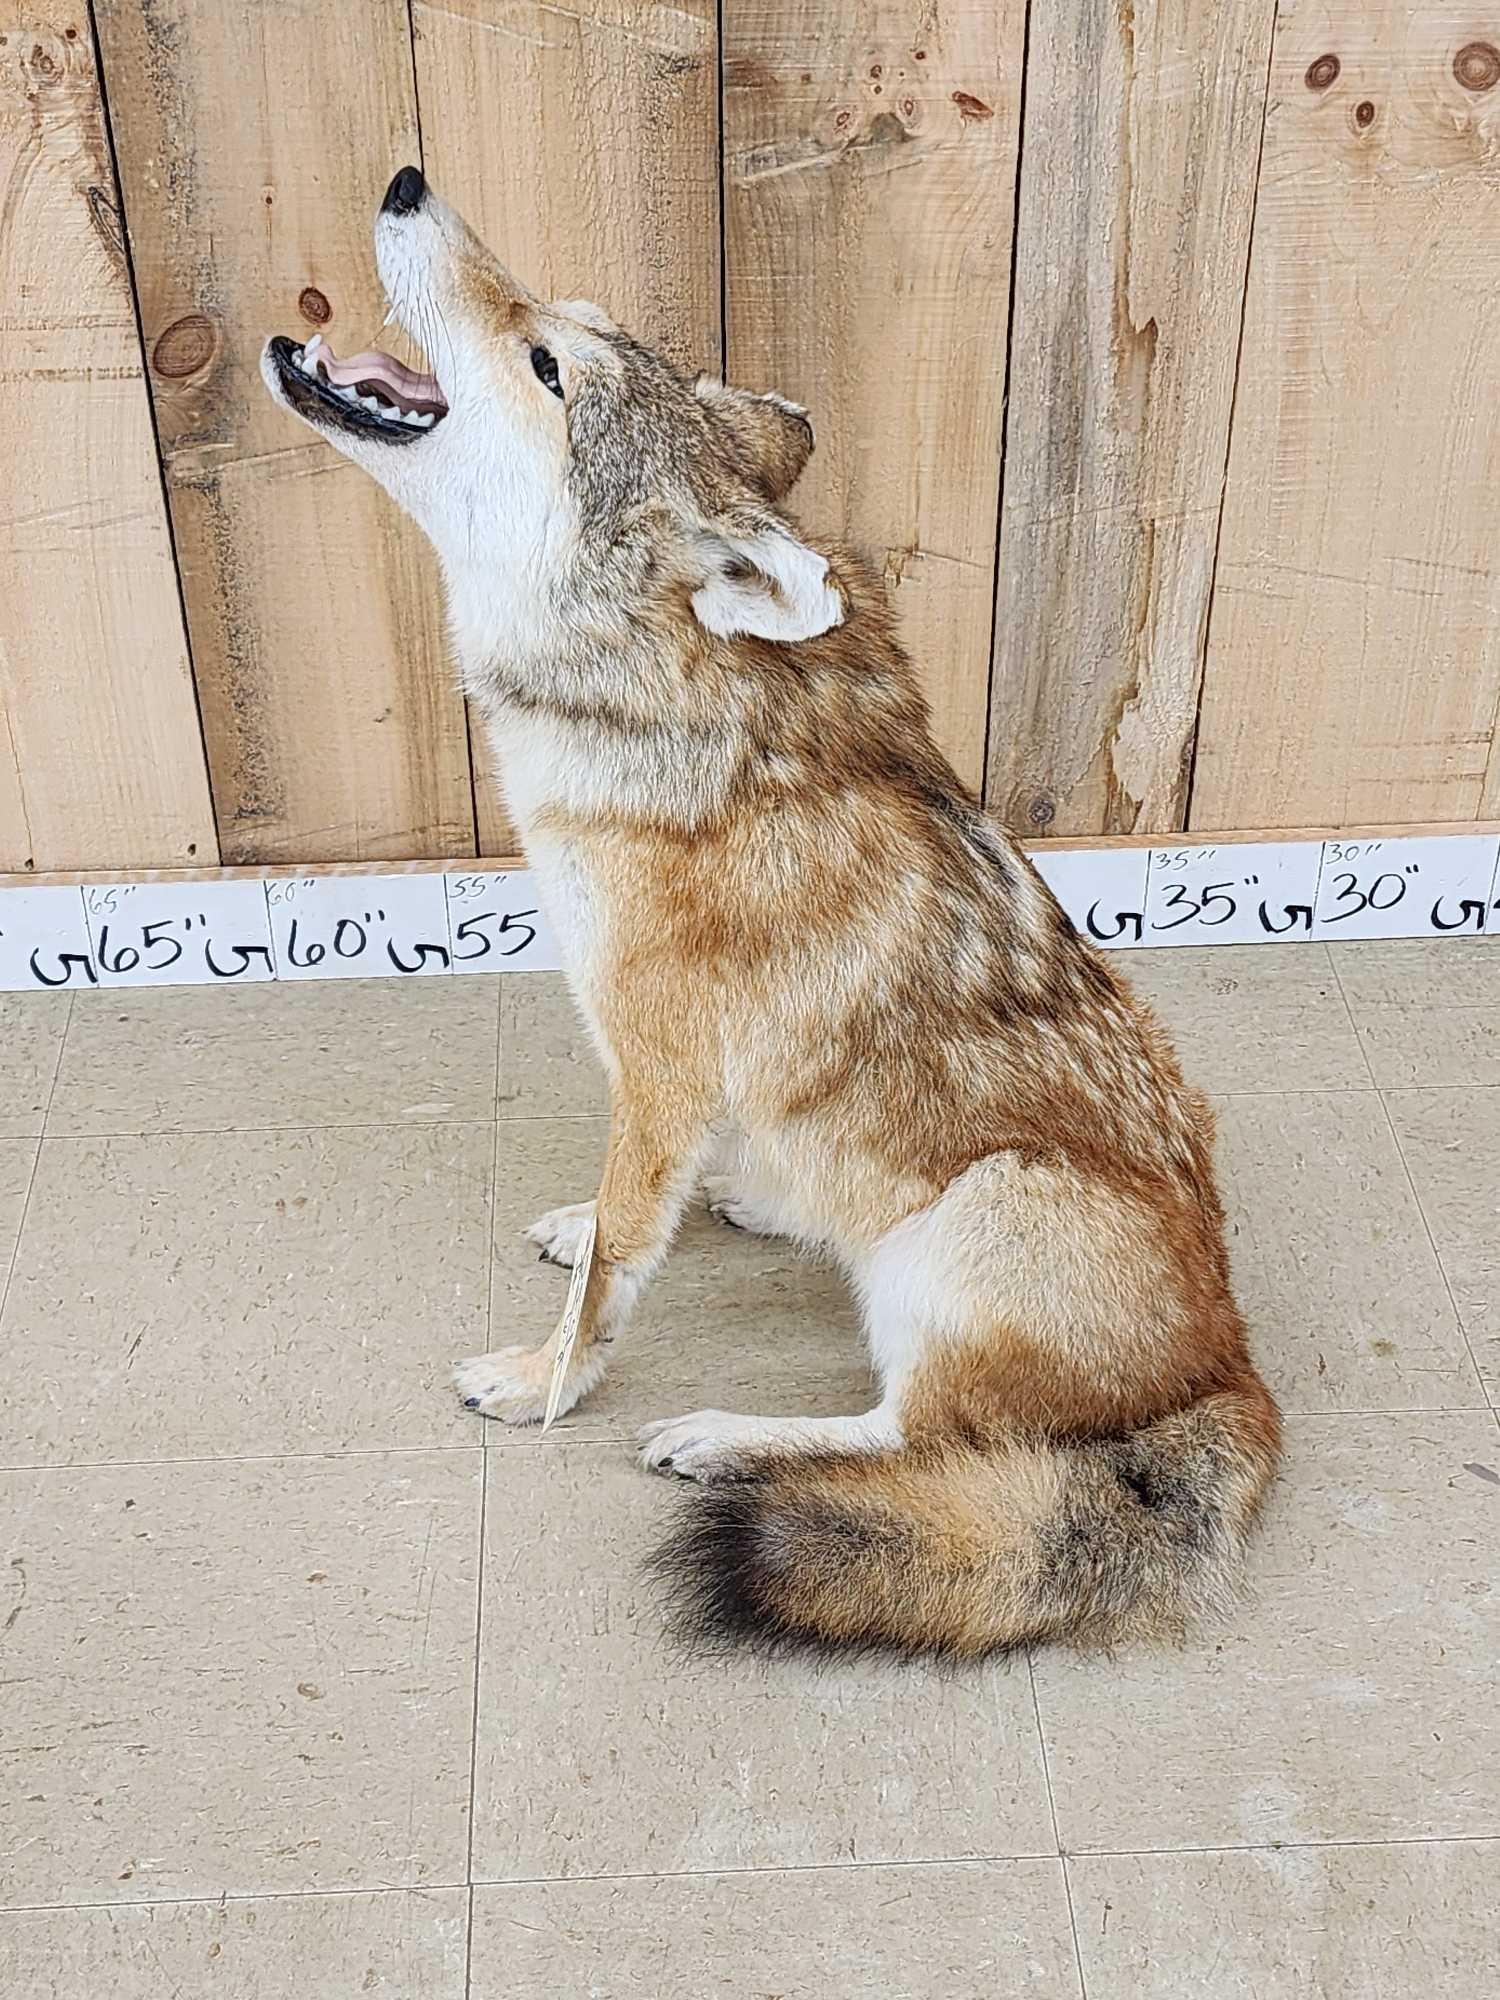 Coyote Catching A Bird Full Body Taxidermy Mount